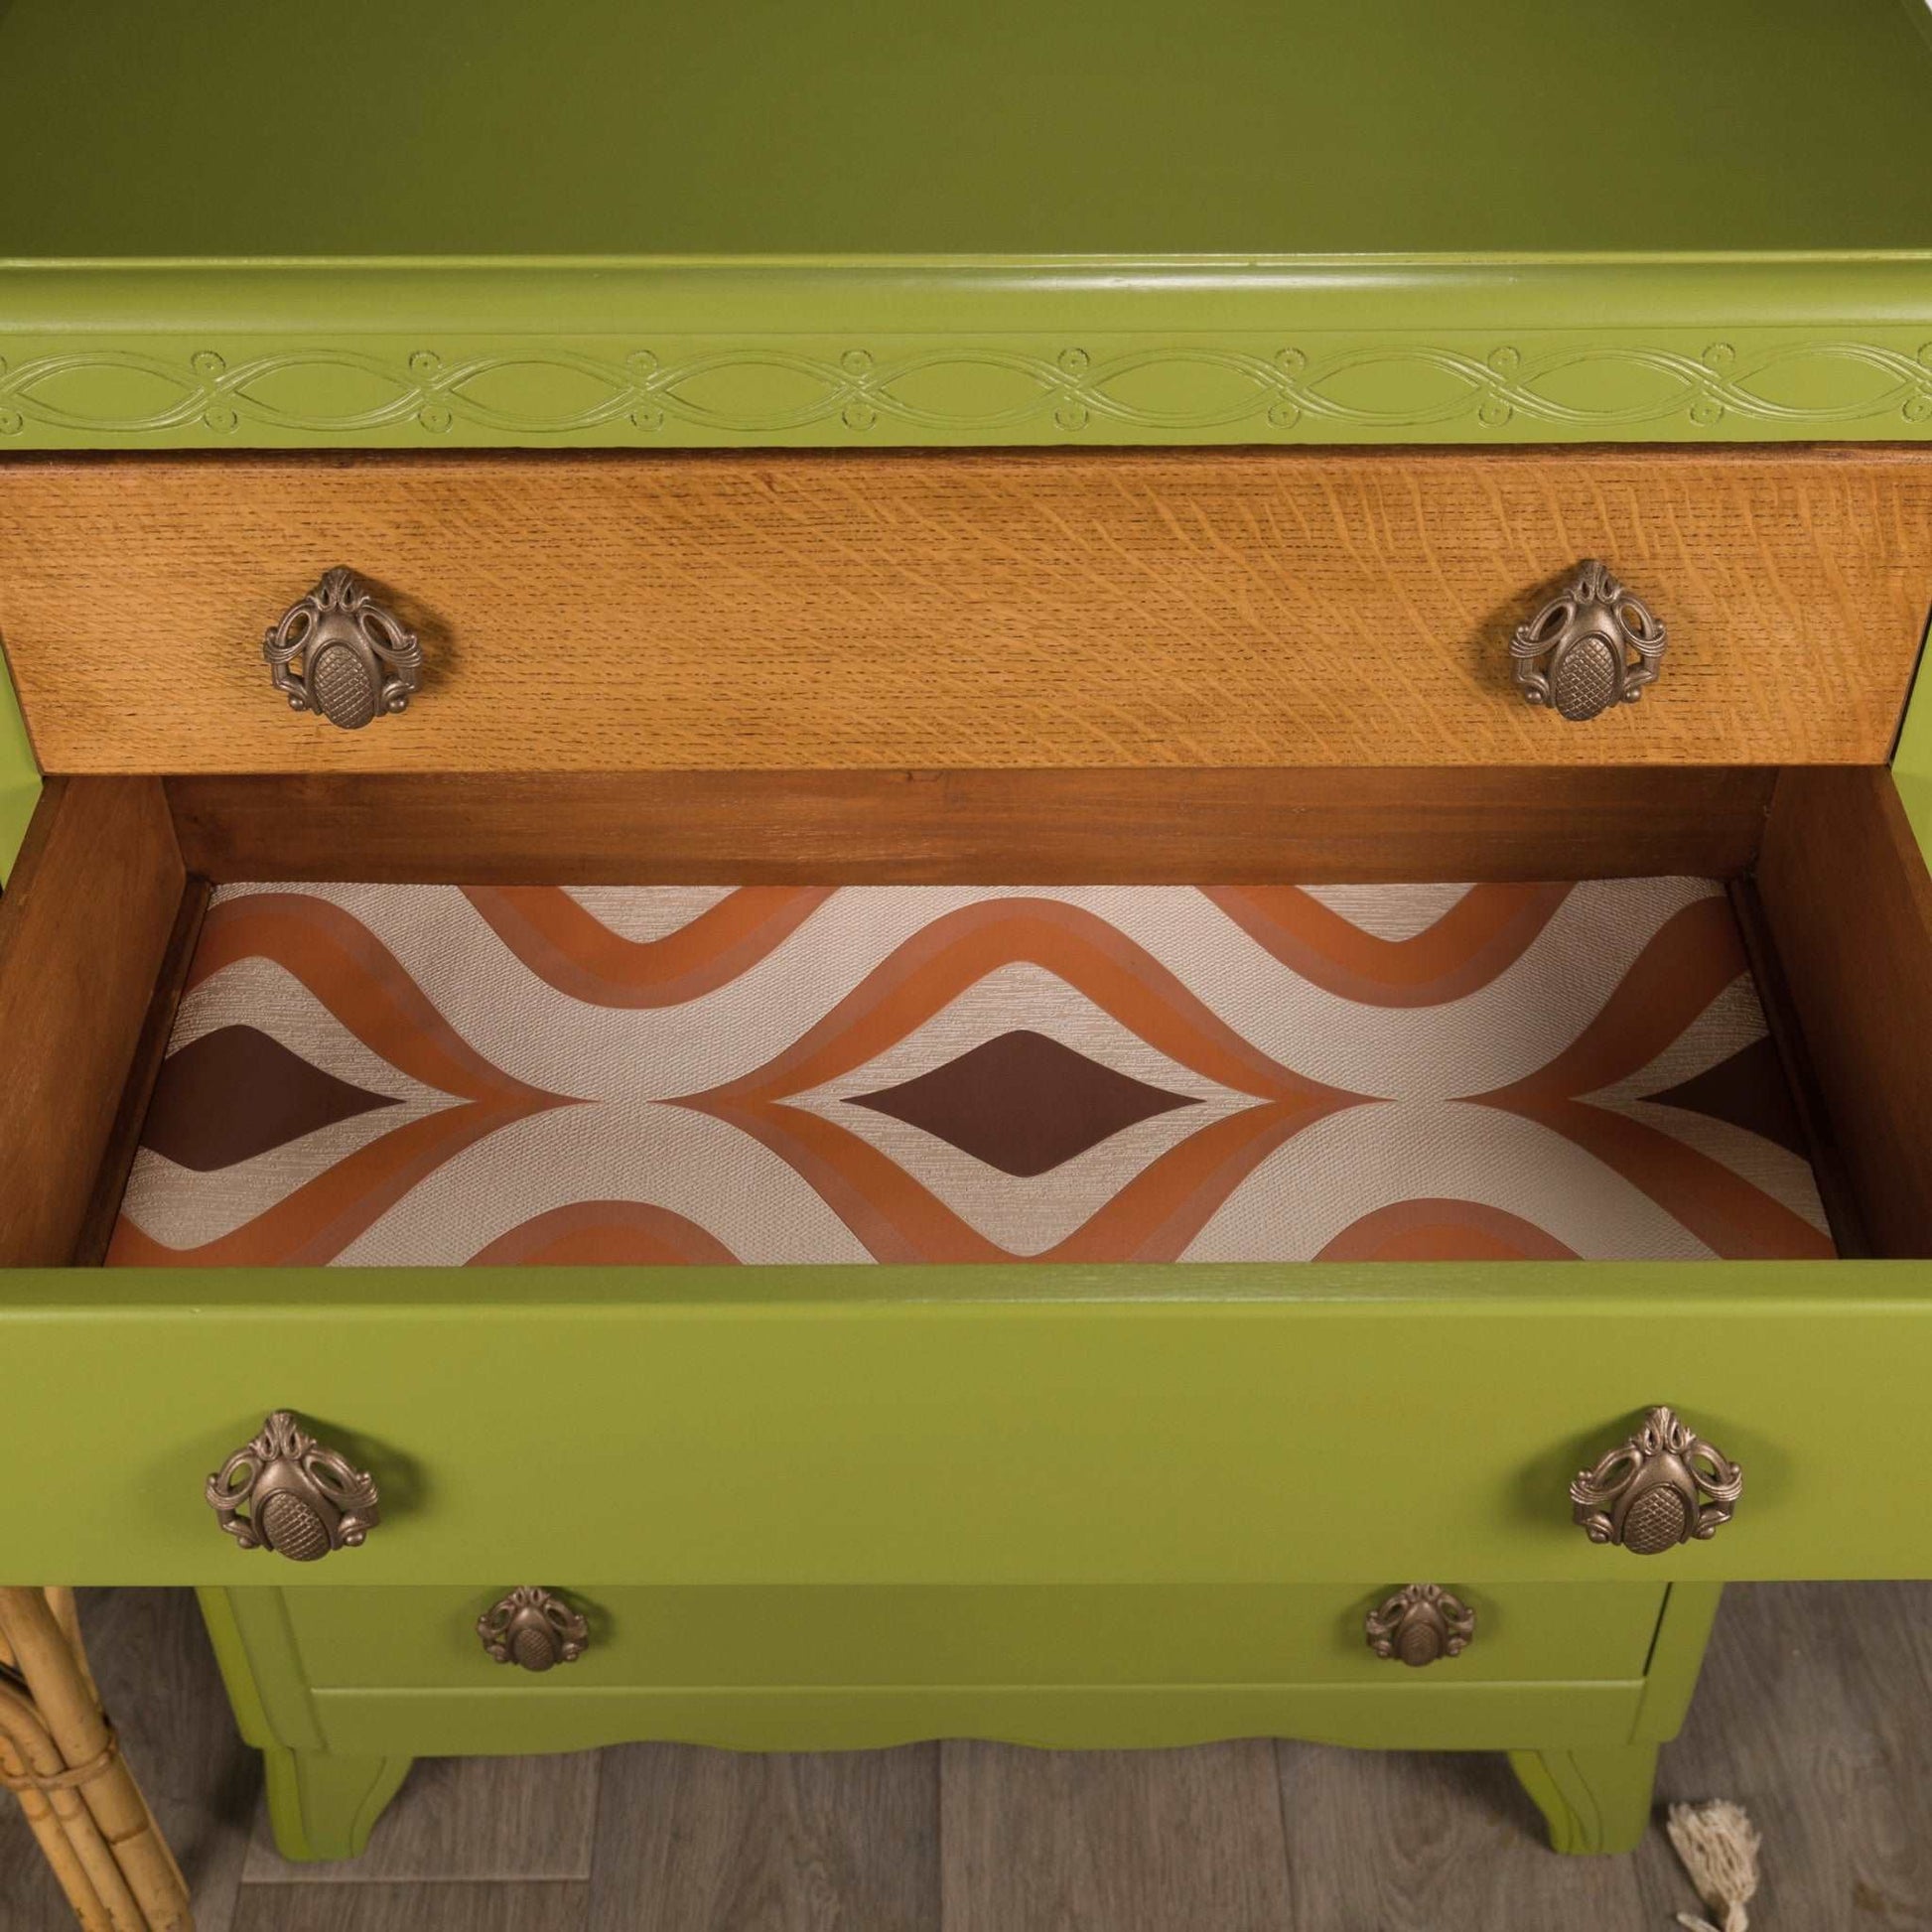 Vintage MCM Green Painted Lebus Chest of Drawers